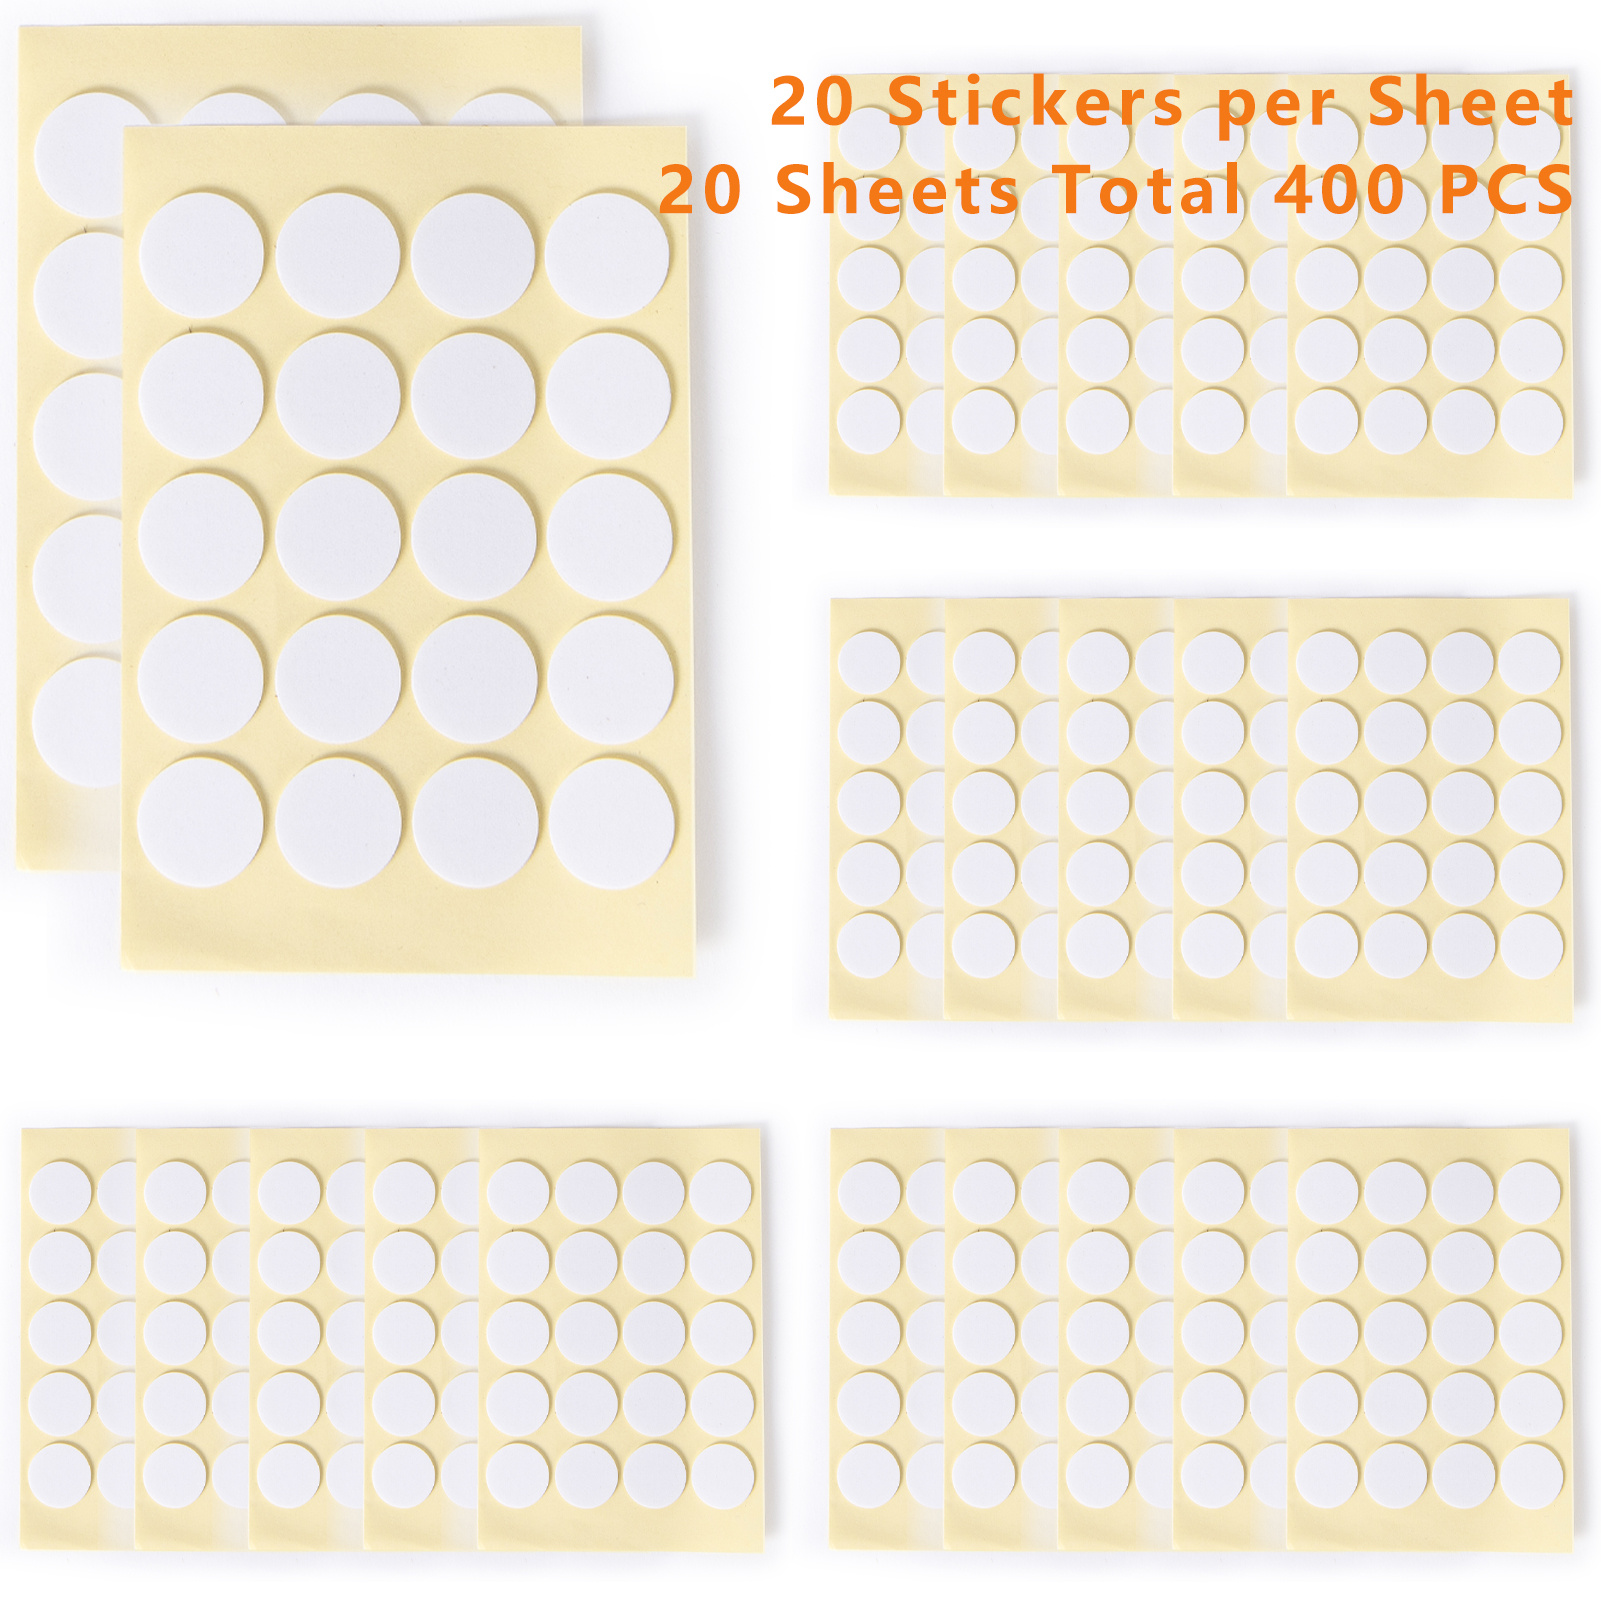 500 Pieces Candle Wick Stickers Wax Stickers Candle Wick Glue Heatproof  Glue Adhere Steady in Hot Wax Double-Sided Stickers for Candle Making